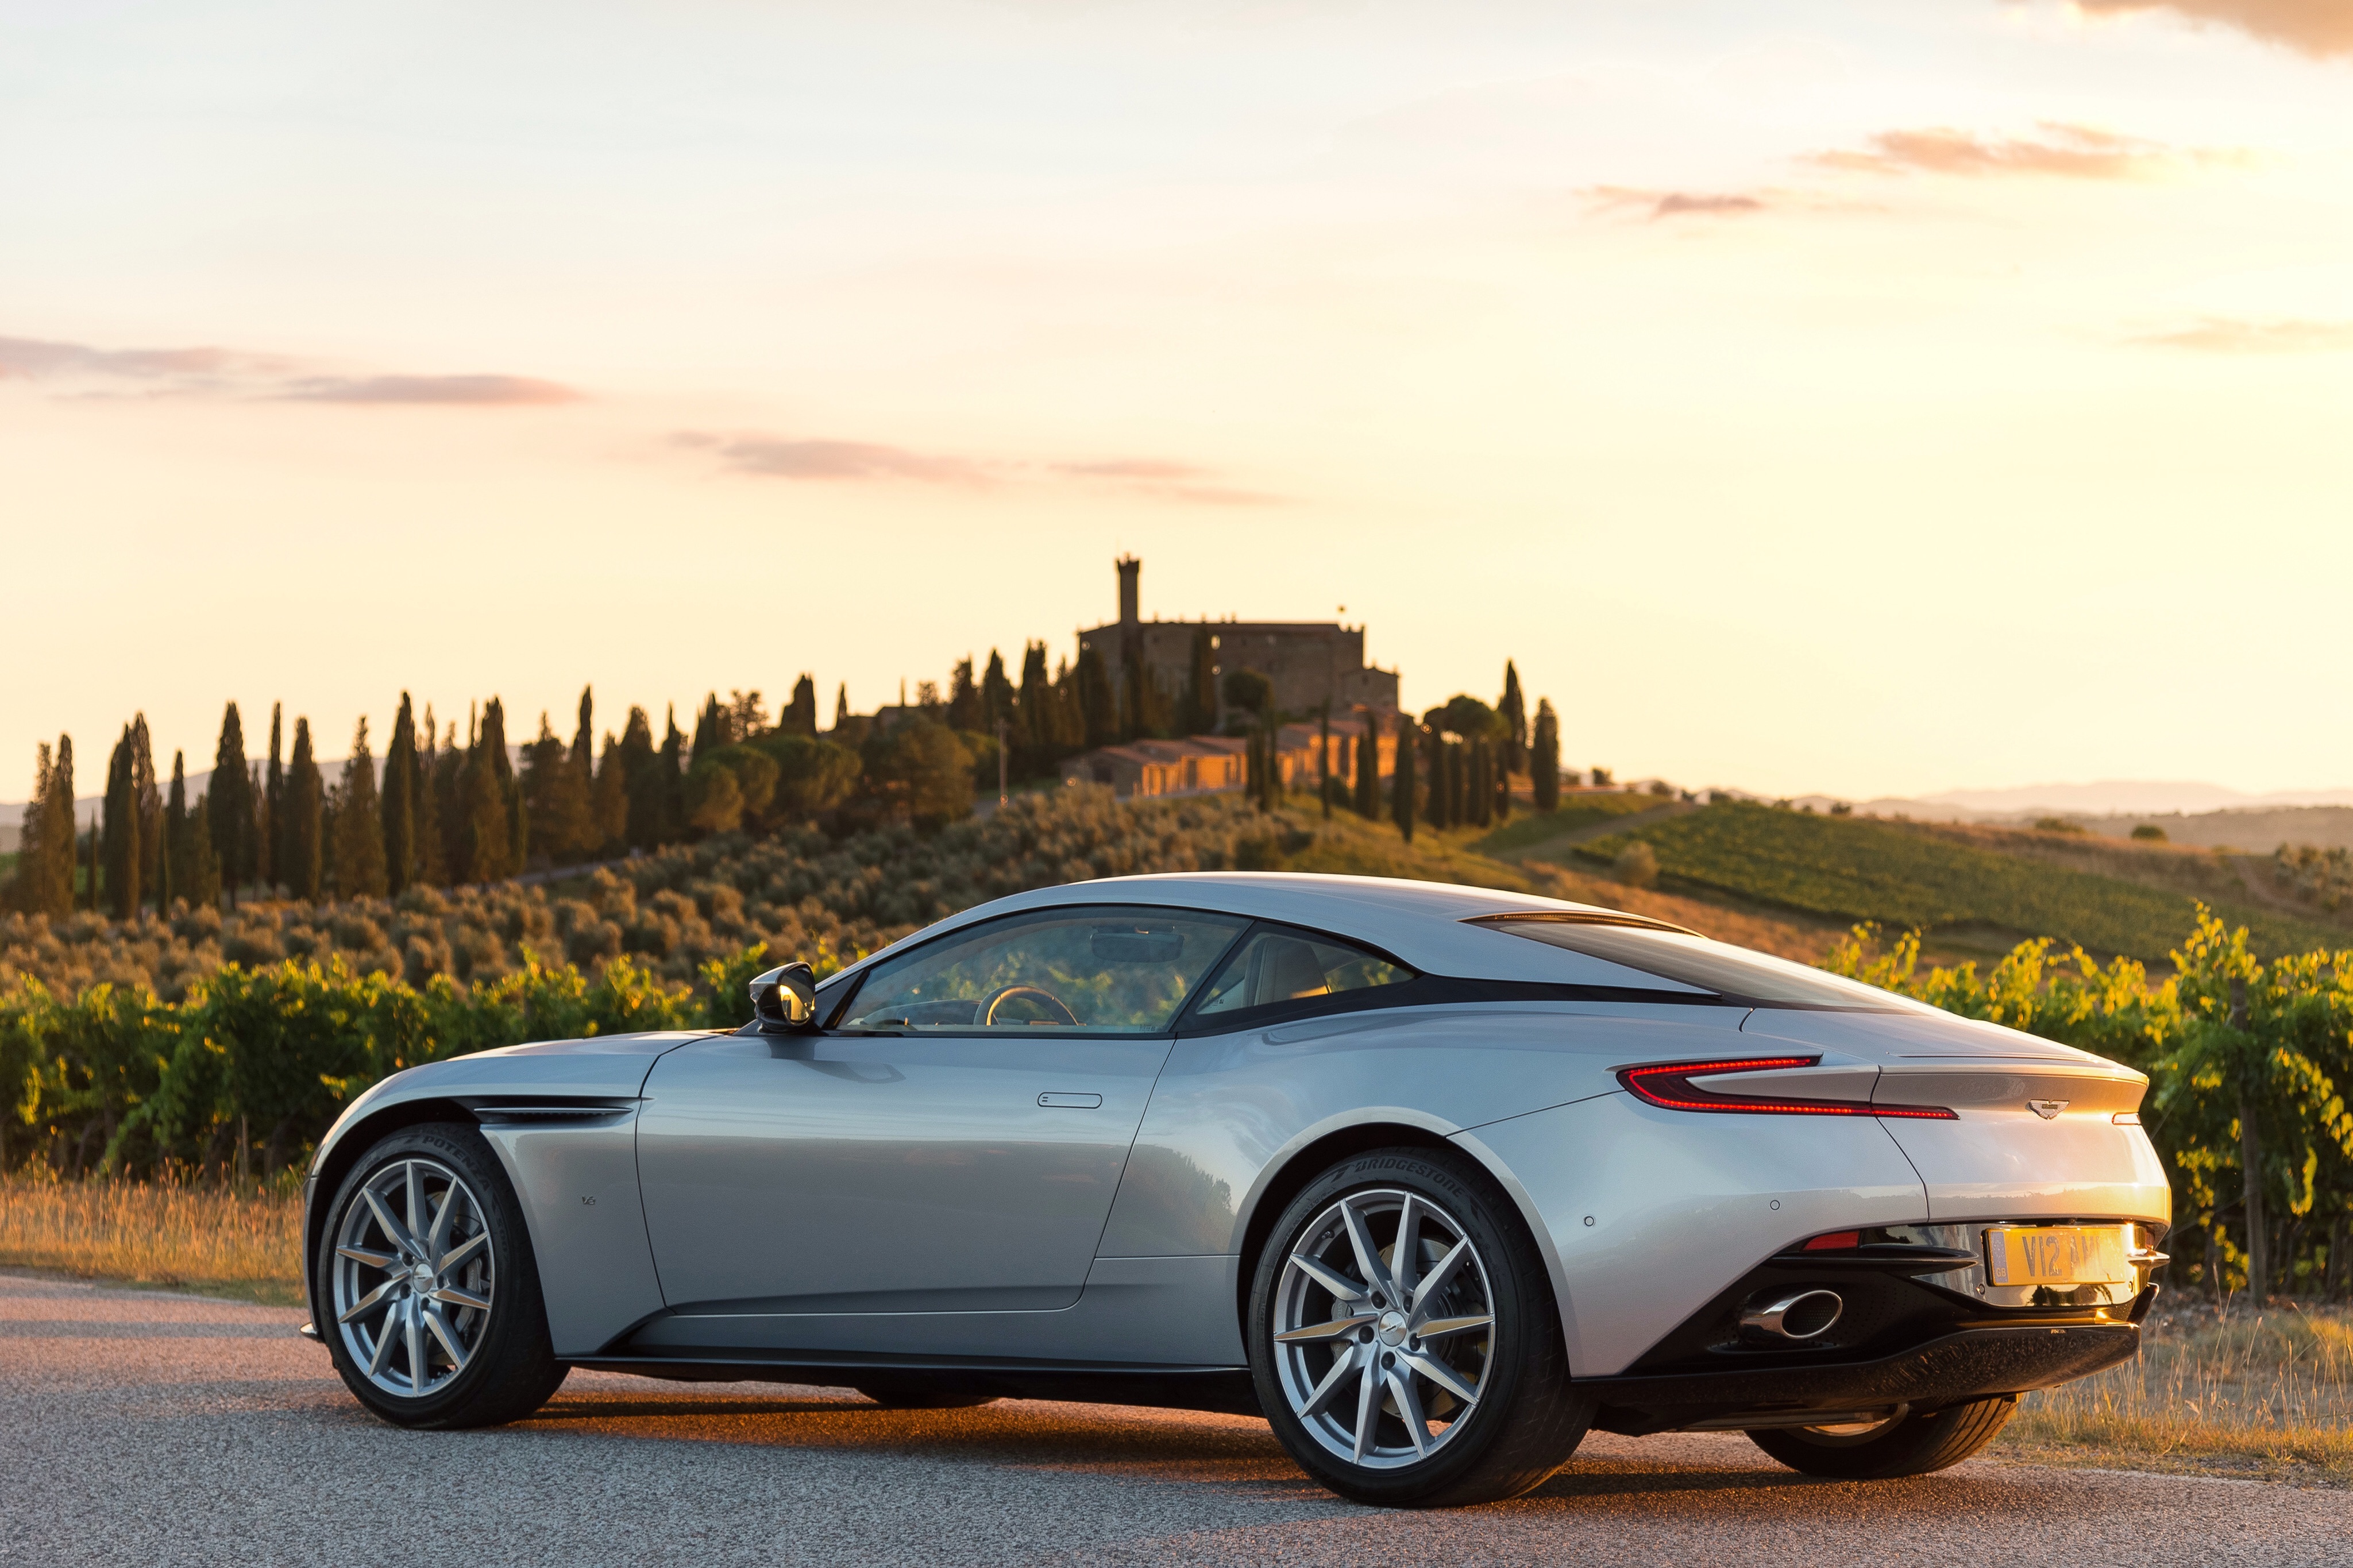 Aston Martin against the backdrop of the sunset